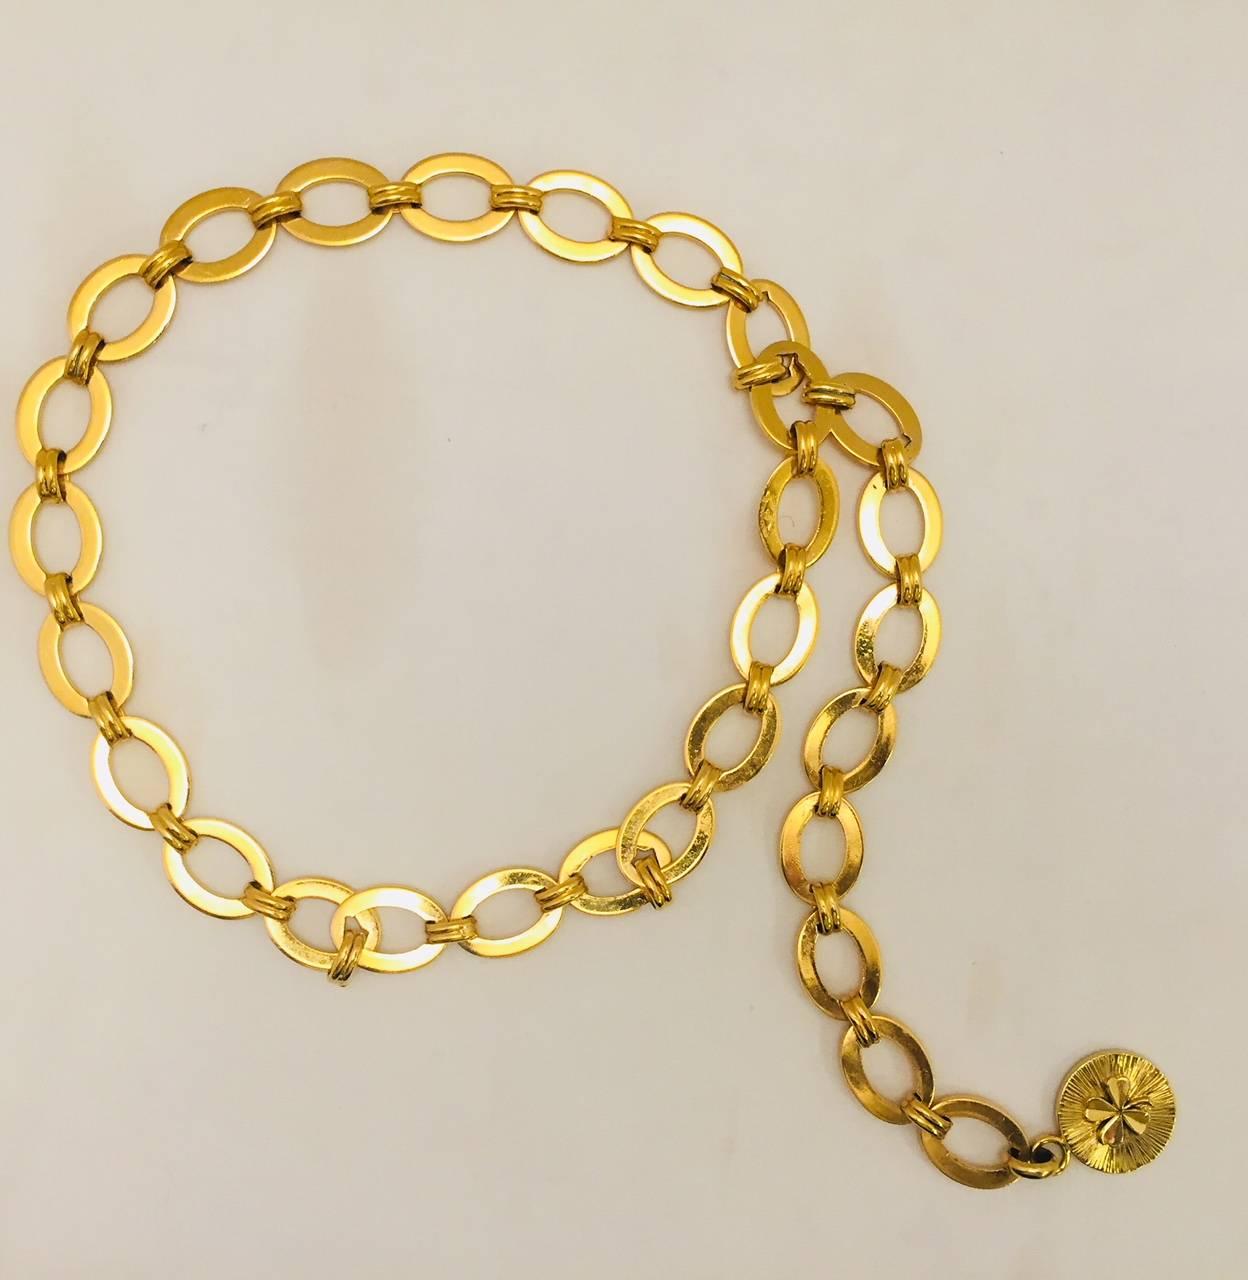 The legend of Coco Chanel lives on in closets of fashionable women world wide!  This classic belt is instantly recognizable!  Fabricated in goldtone, it has open oval links connected by oblong ribbed links.  A double sided round medallion features